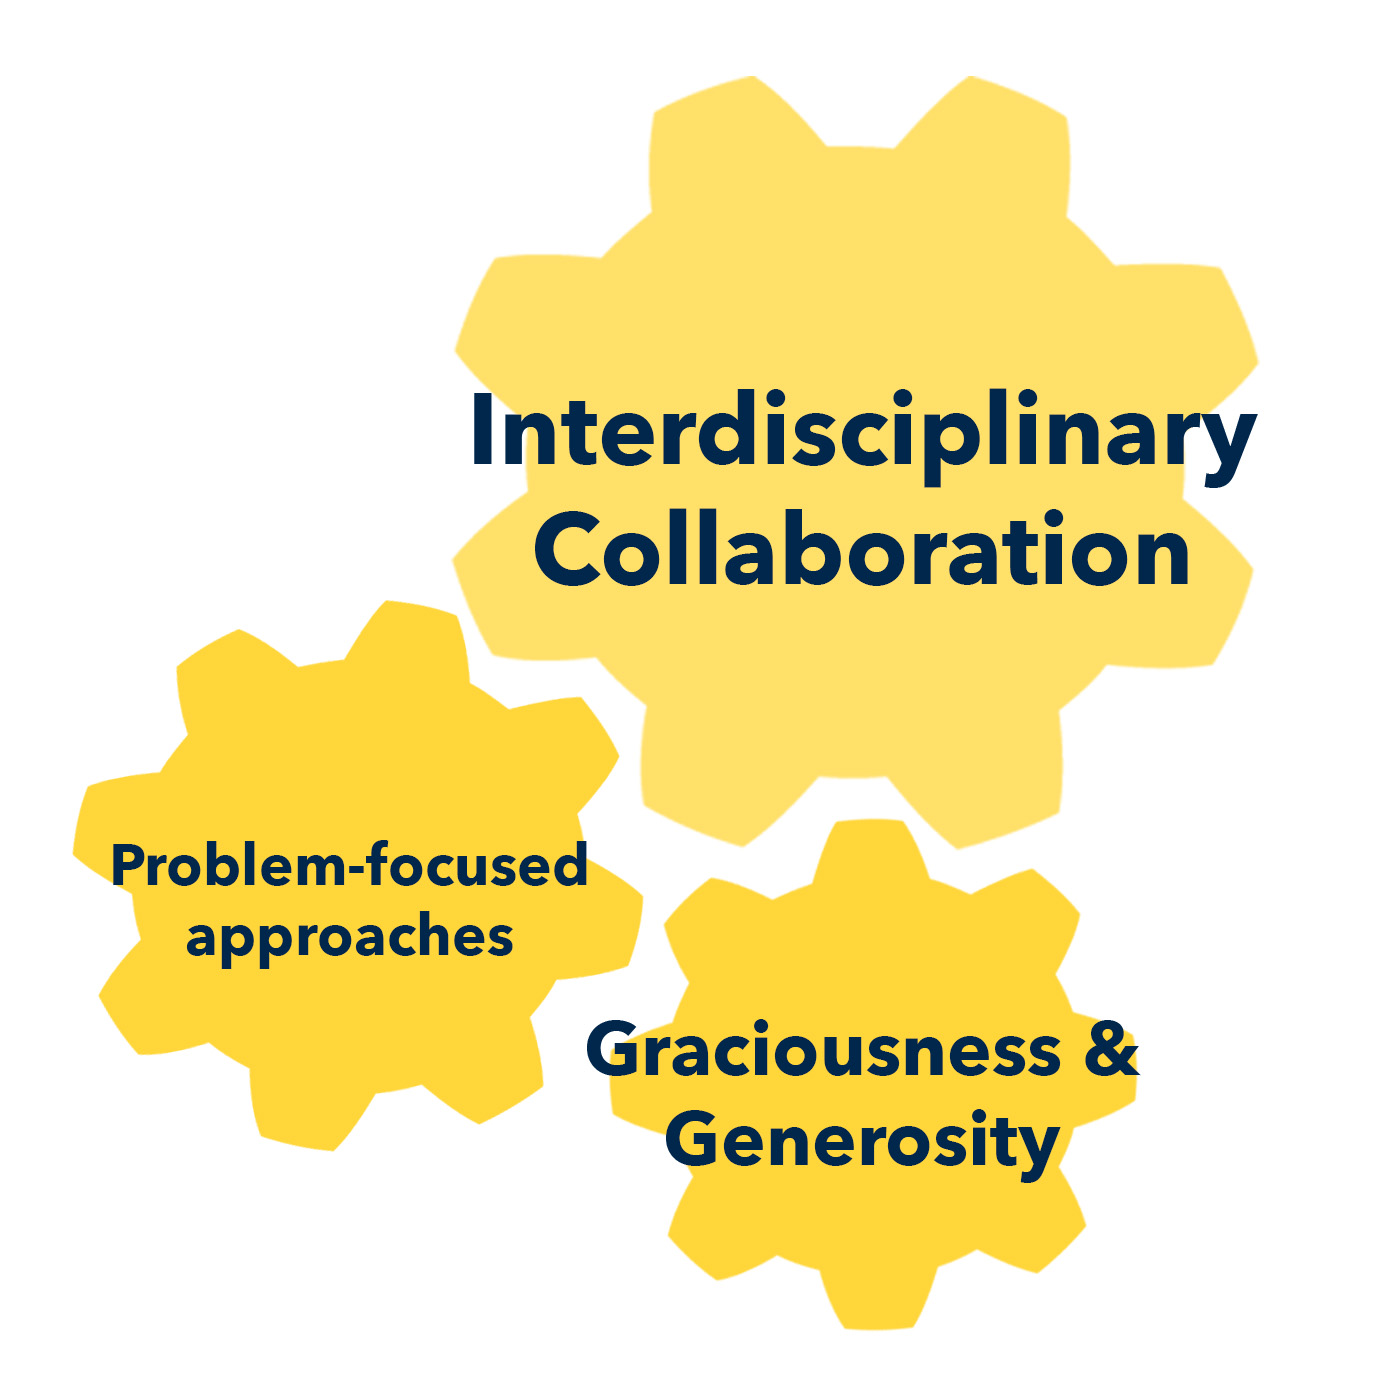 Interlocking gears labeled "interdisciplinary collaboration", "problem-focused approaches", and "graciousness & generosity"